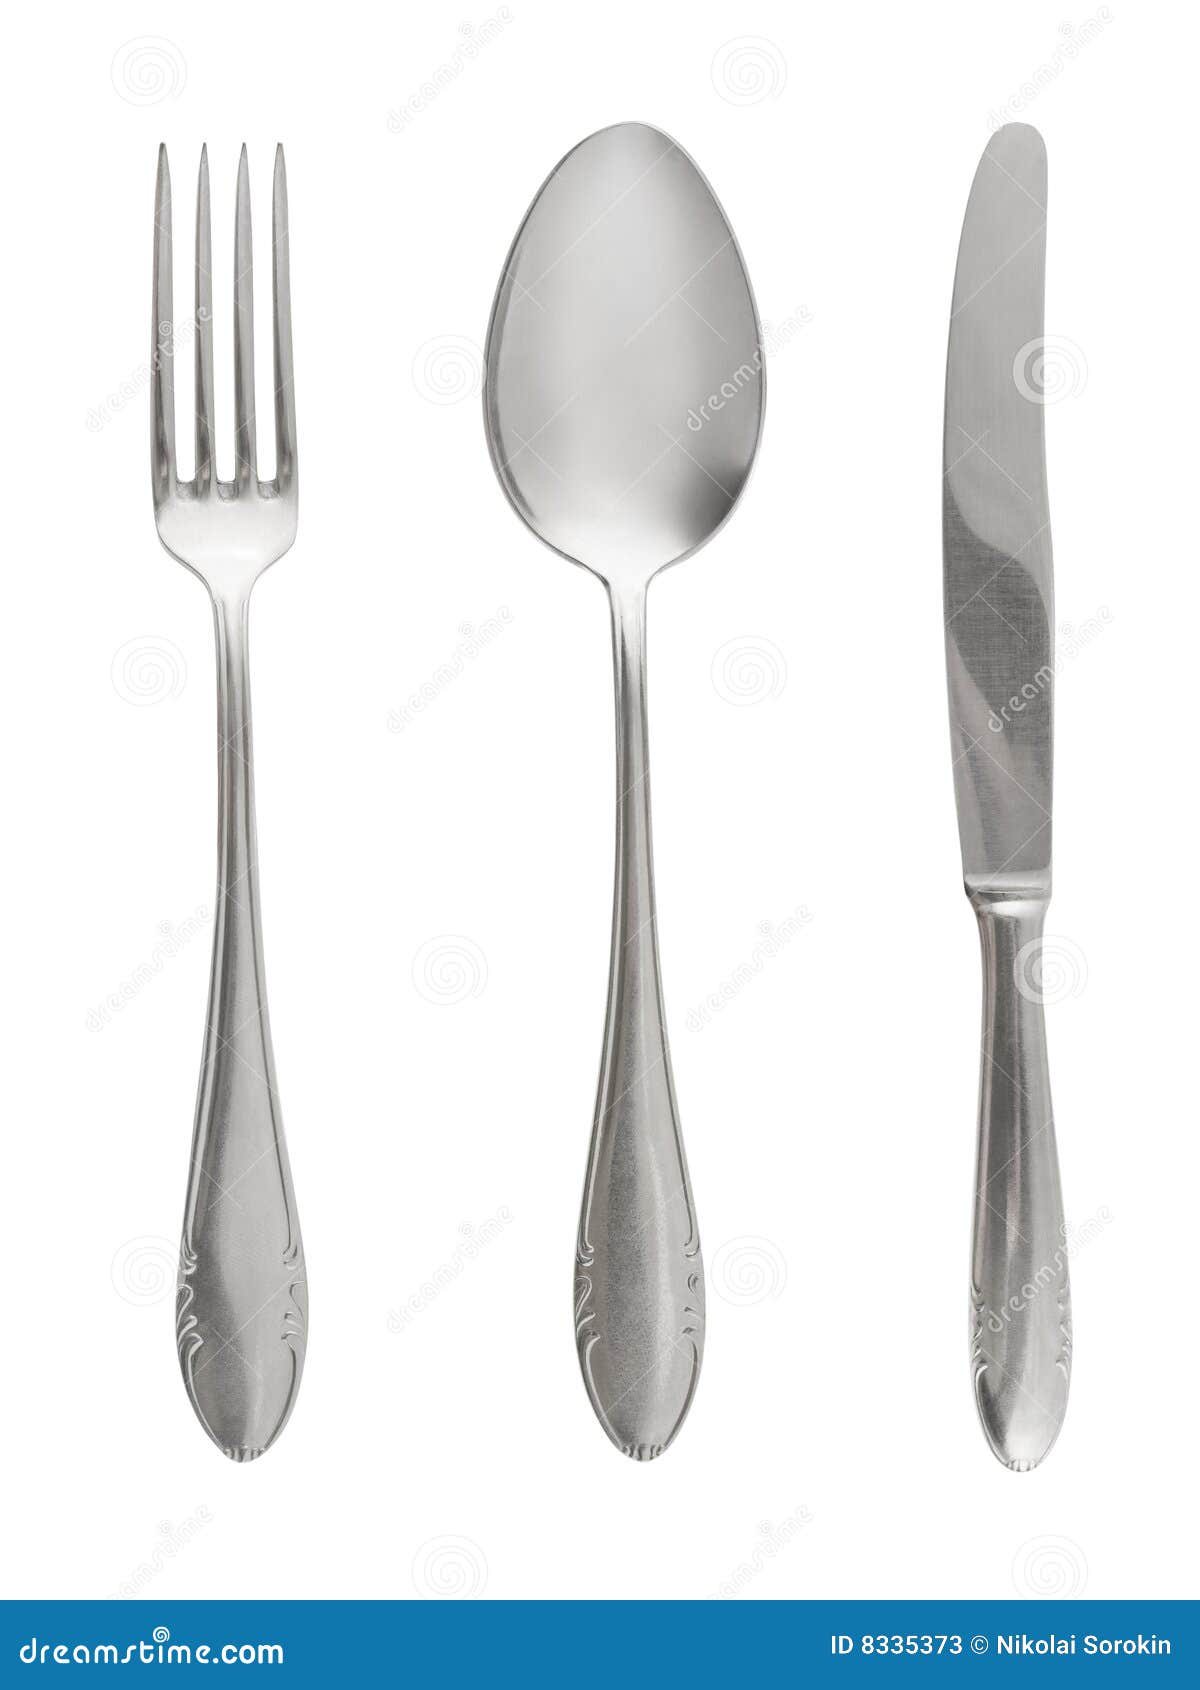 fork, spoon and knife